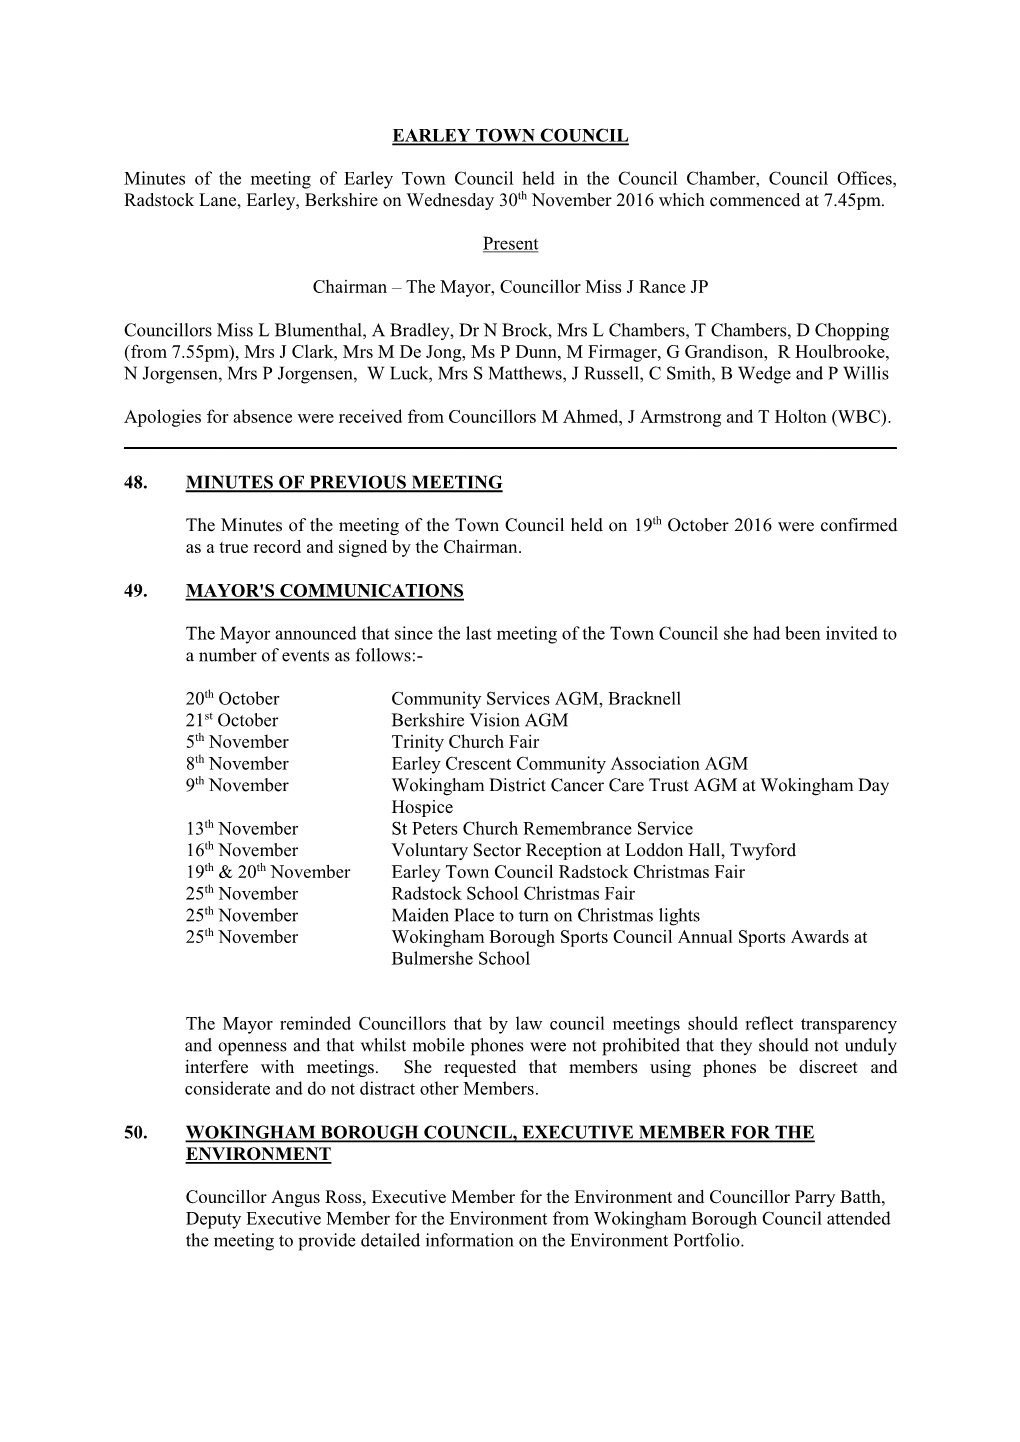 EARLEY TOWN COUNCIL Minutes of the Meeting of Earley Town Council